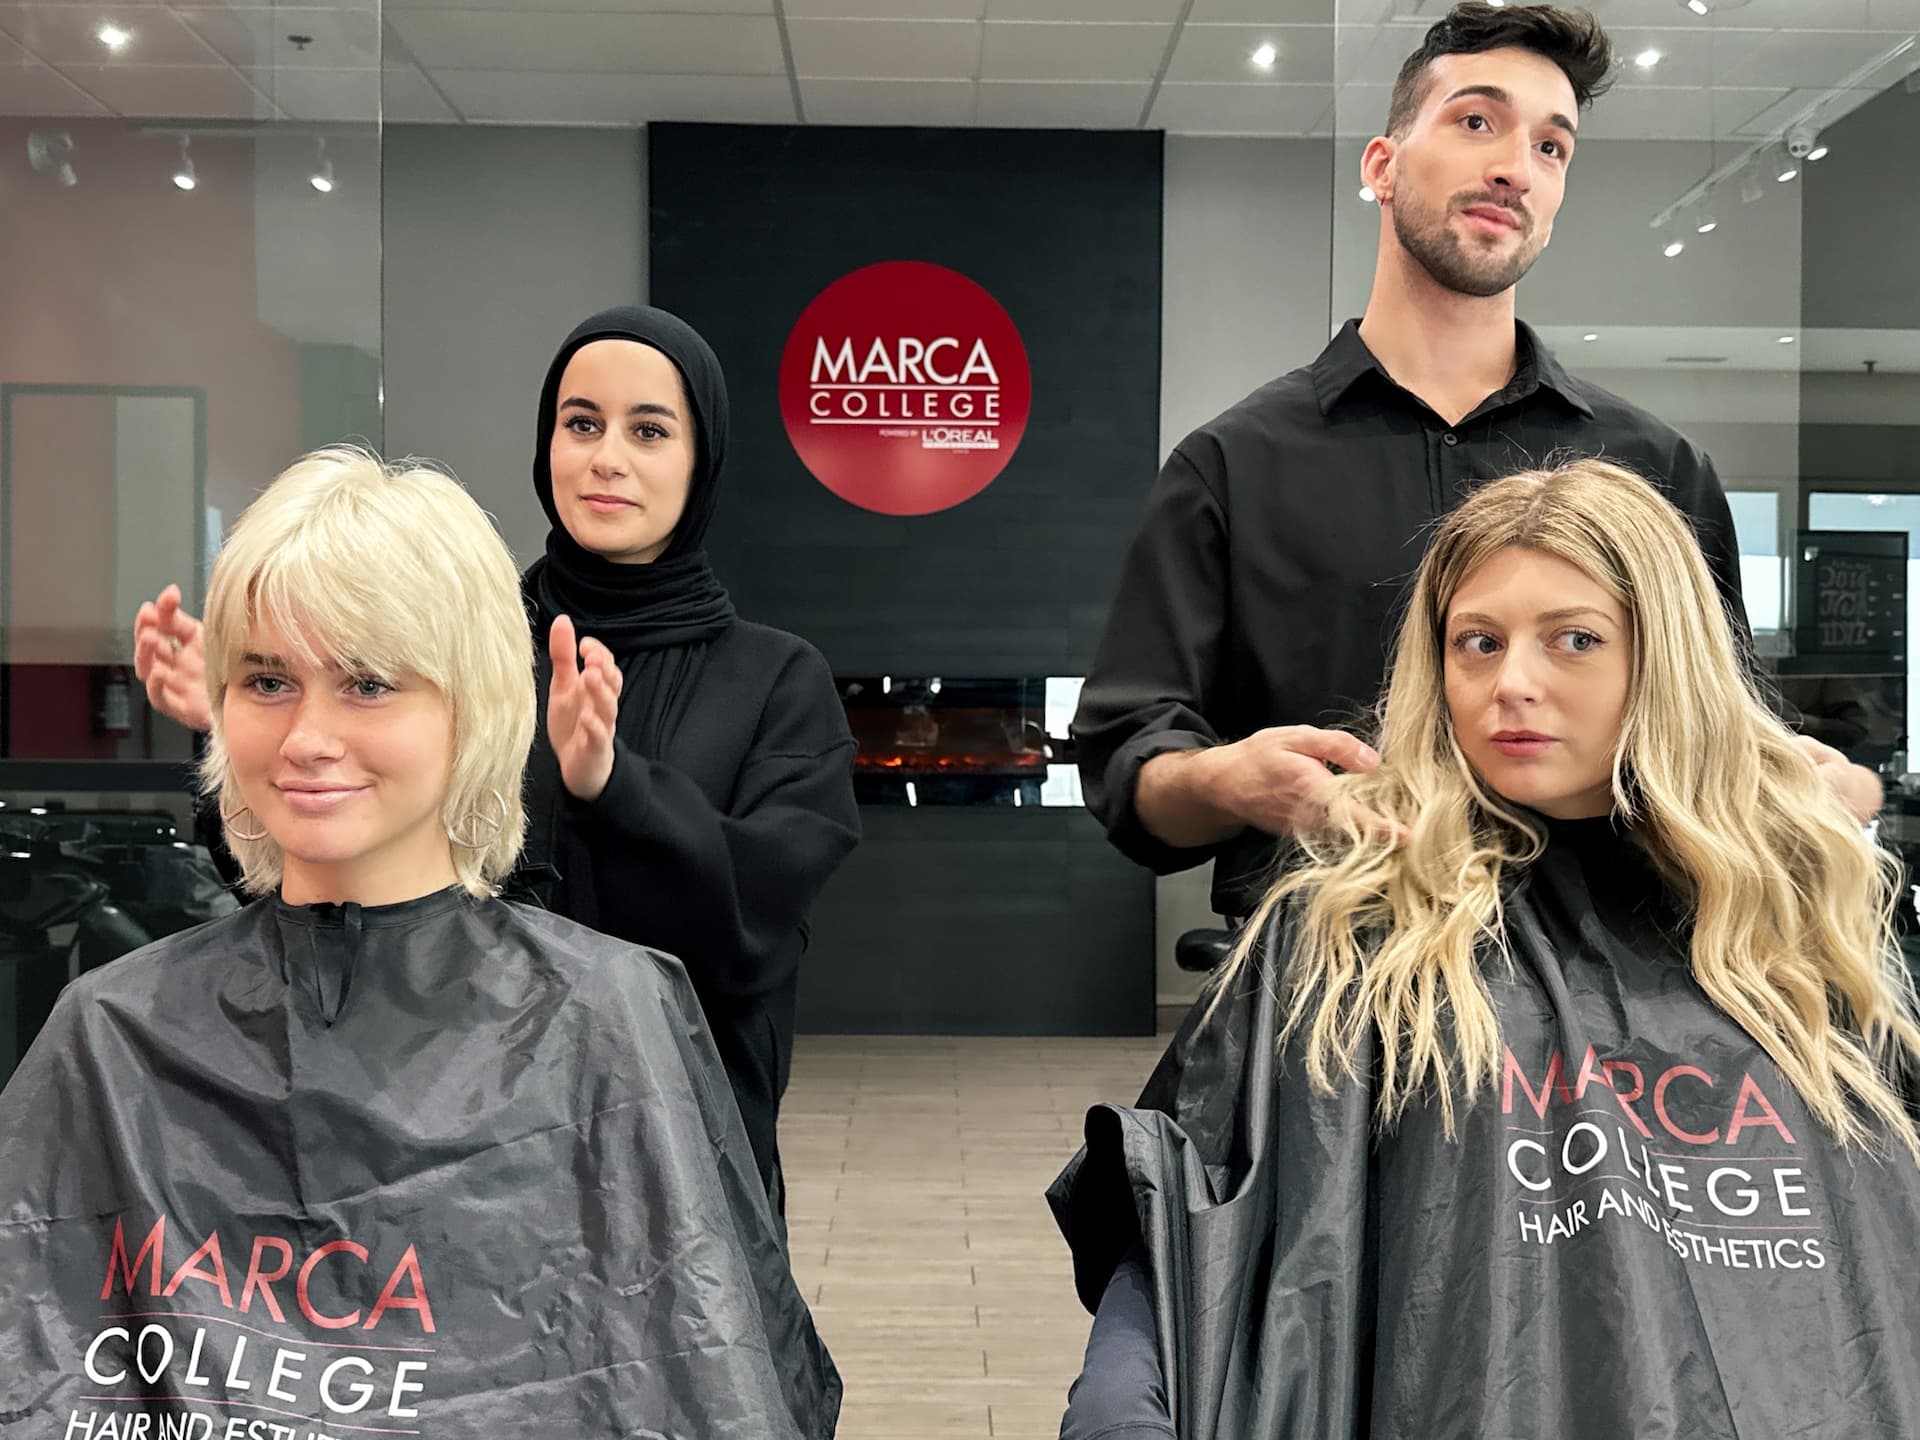 Marca college hairstyling students with clients